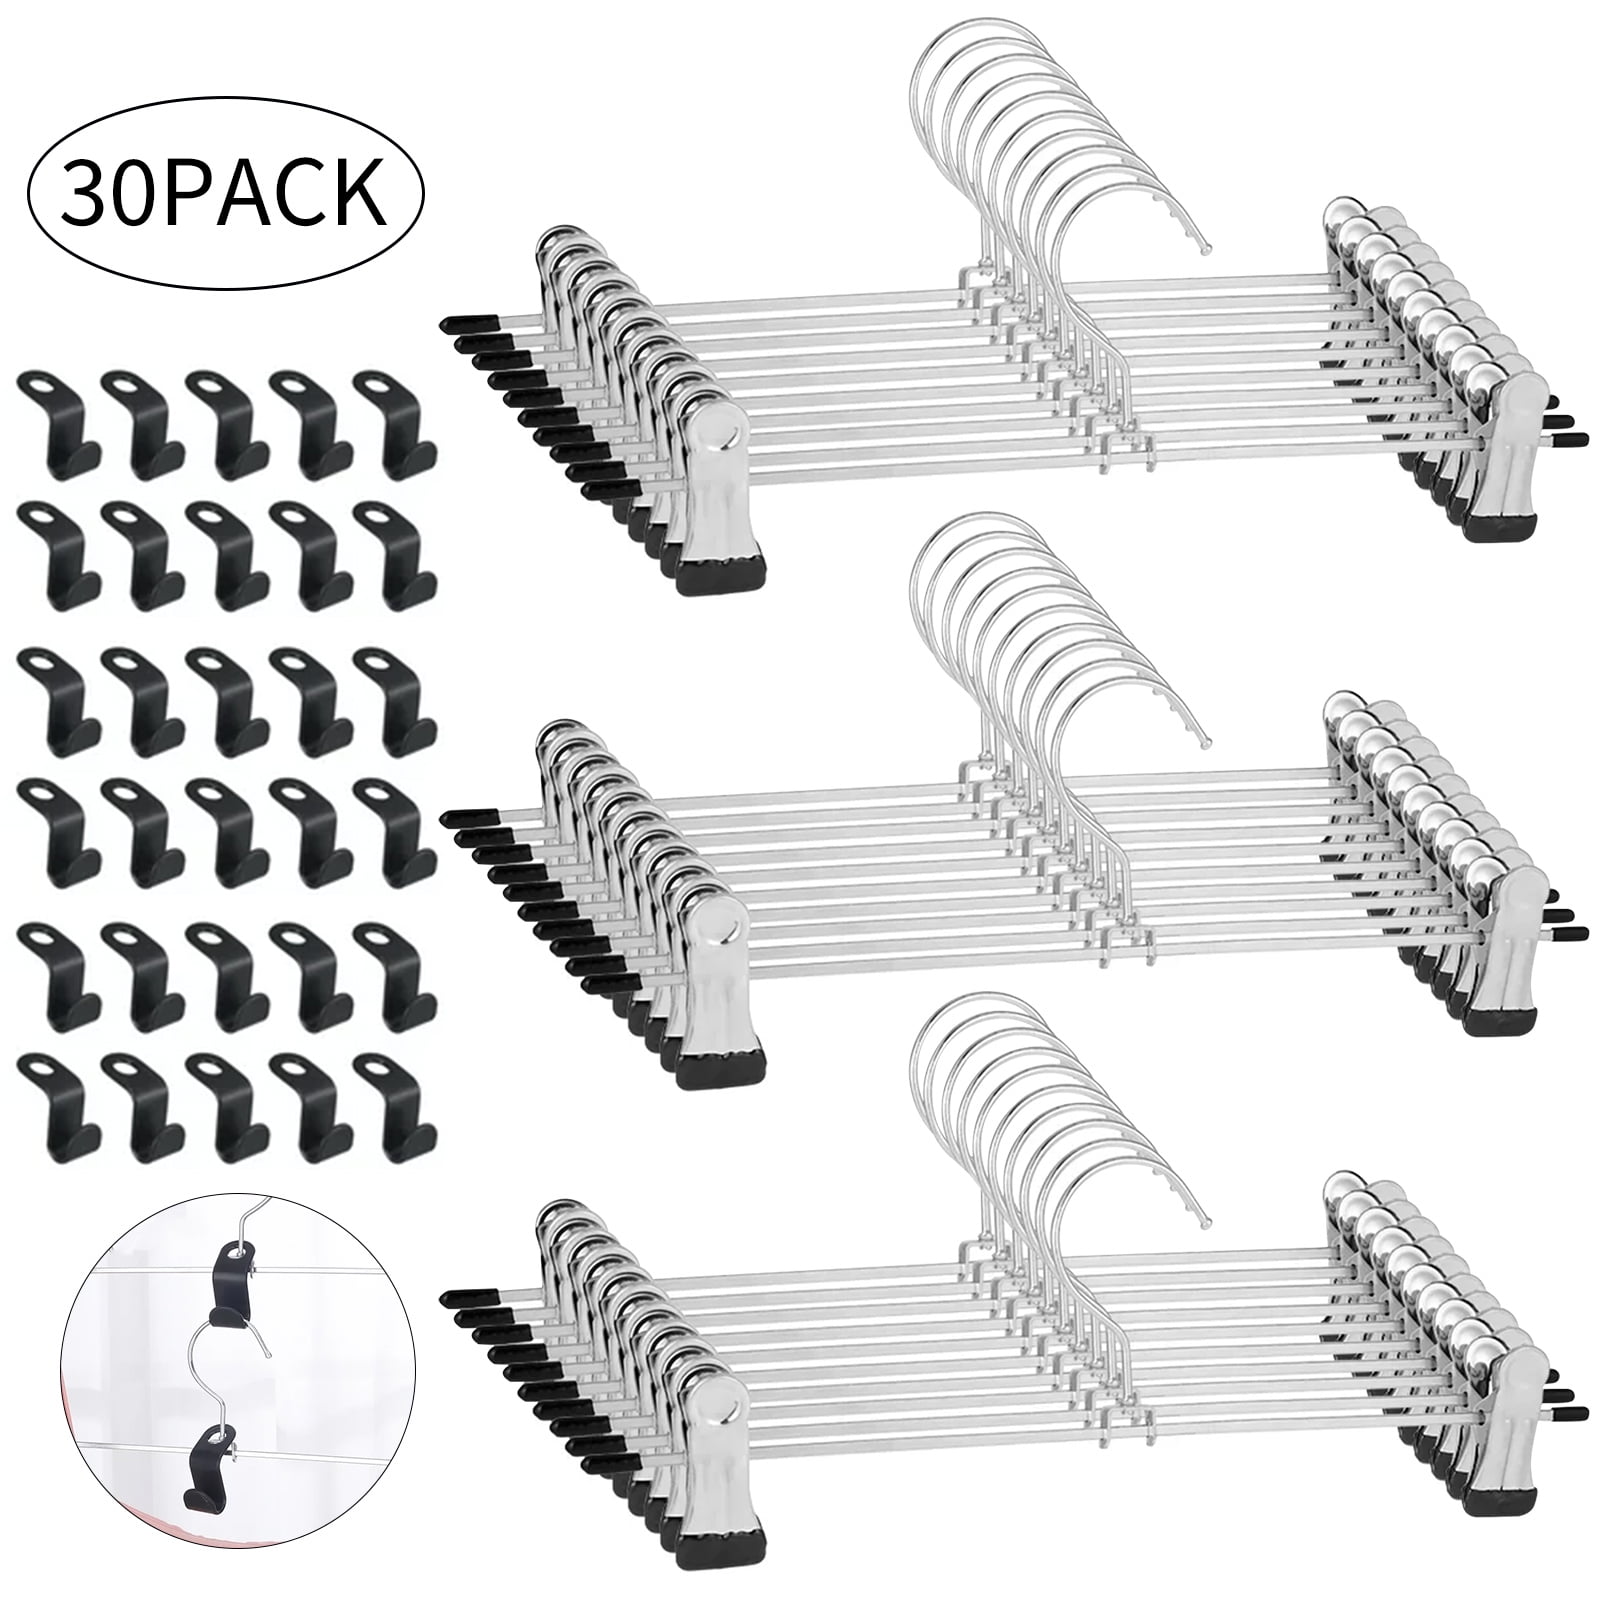 Topekada 30 Pack Pants Hangers with Connector Hooks Set, 9-11 Inch Non Slip  Stainless Steel Metal Pants Hanger with Clips, Space Saving Clothes Hangers  for Shorts, Skirt, Bottoms, Jeans 